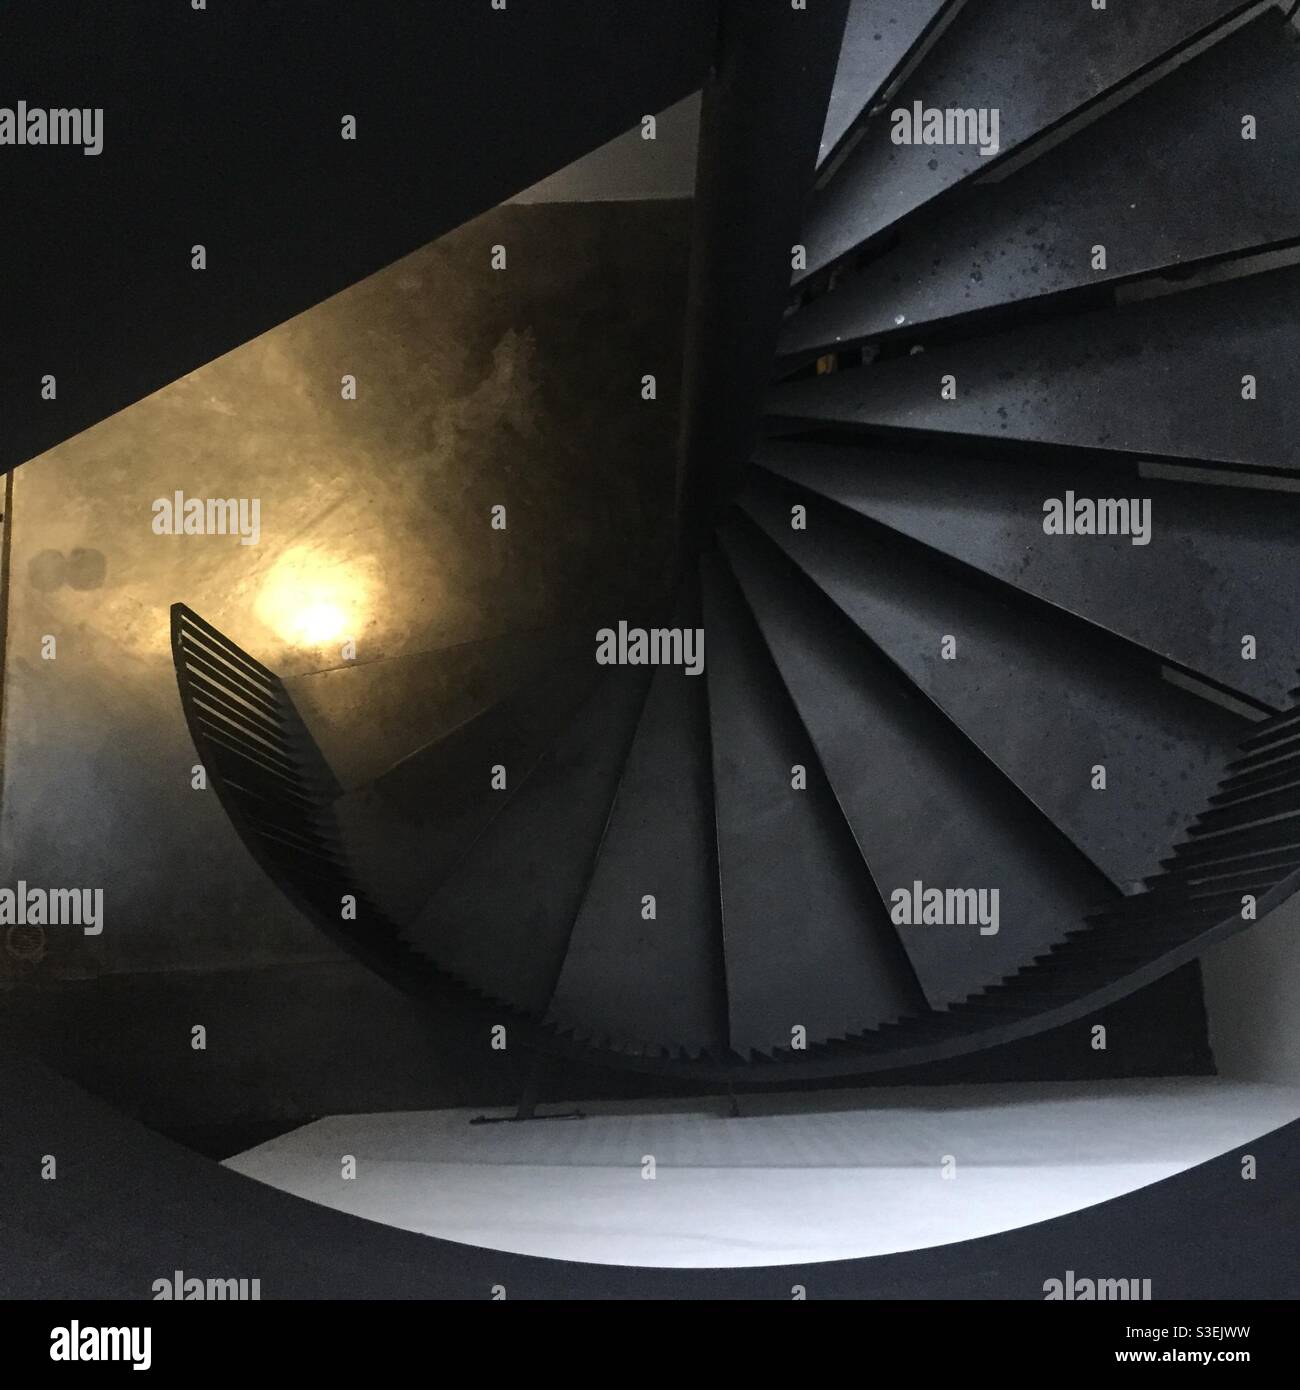 Art of black spiral staircase in a hotel in Bangkok Stock Photo